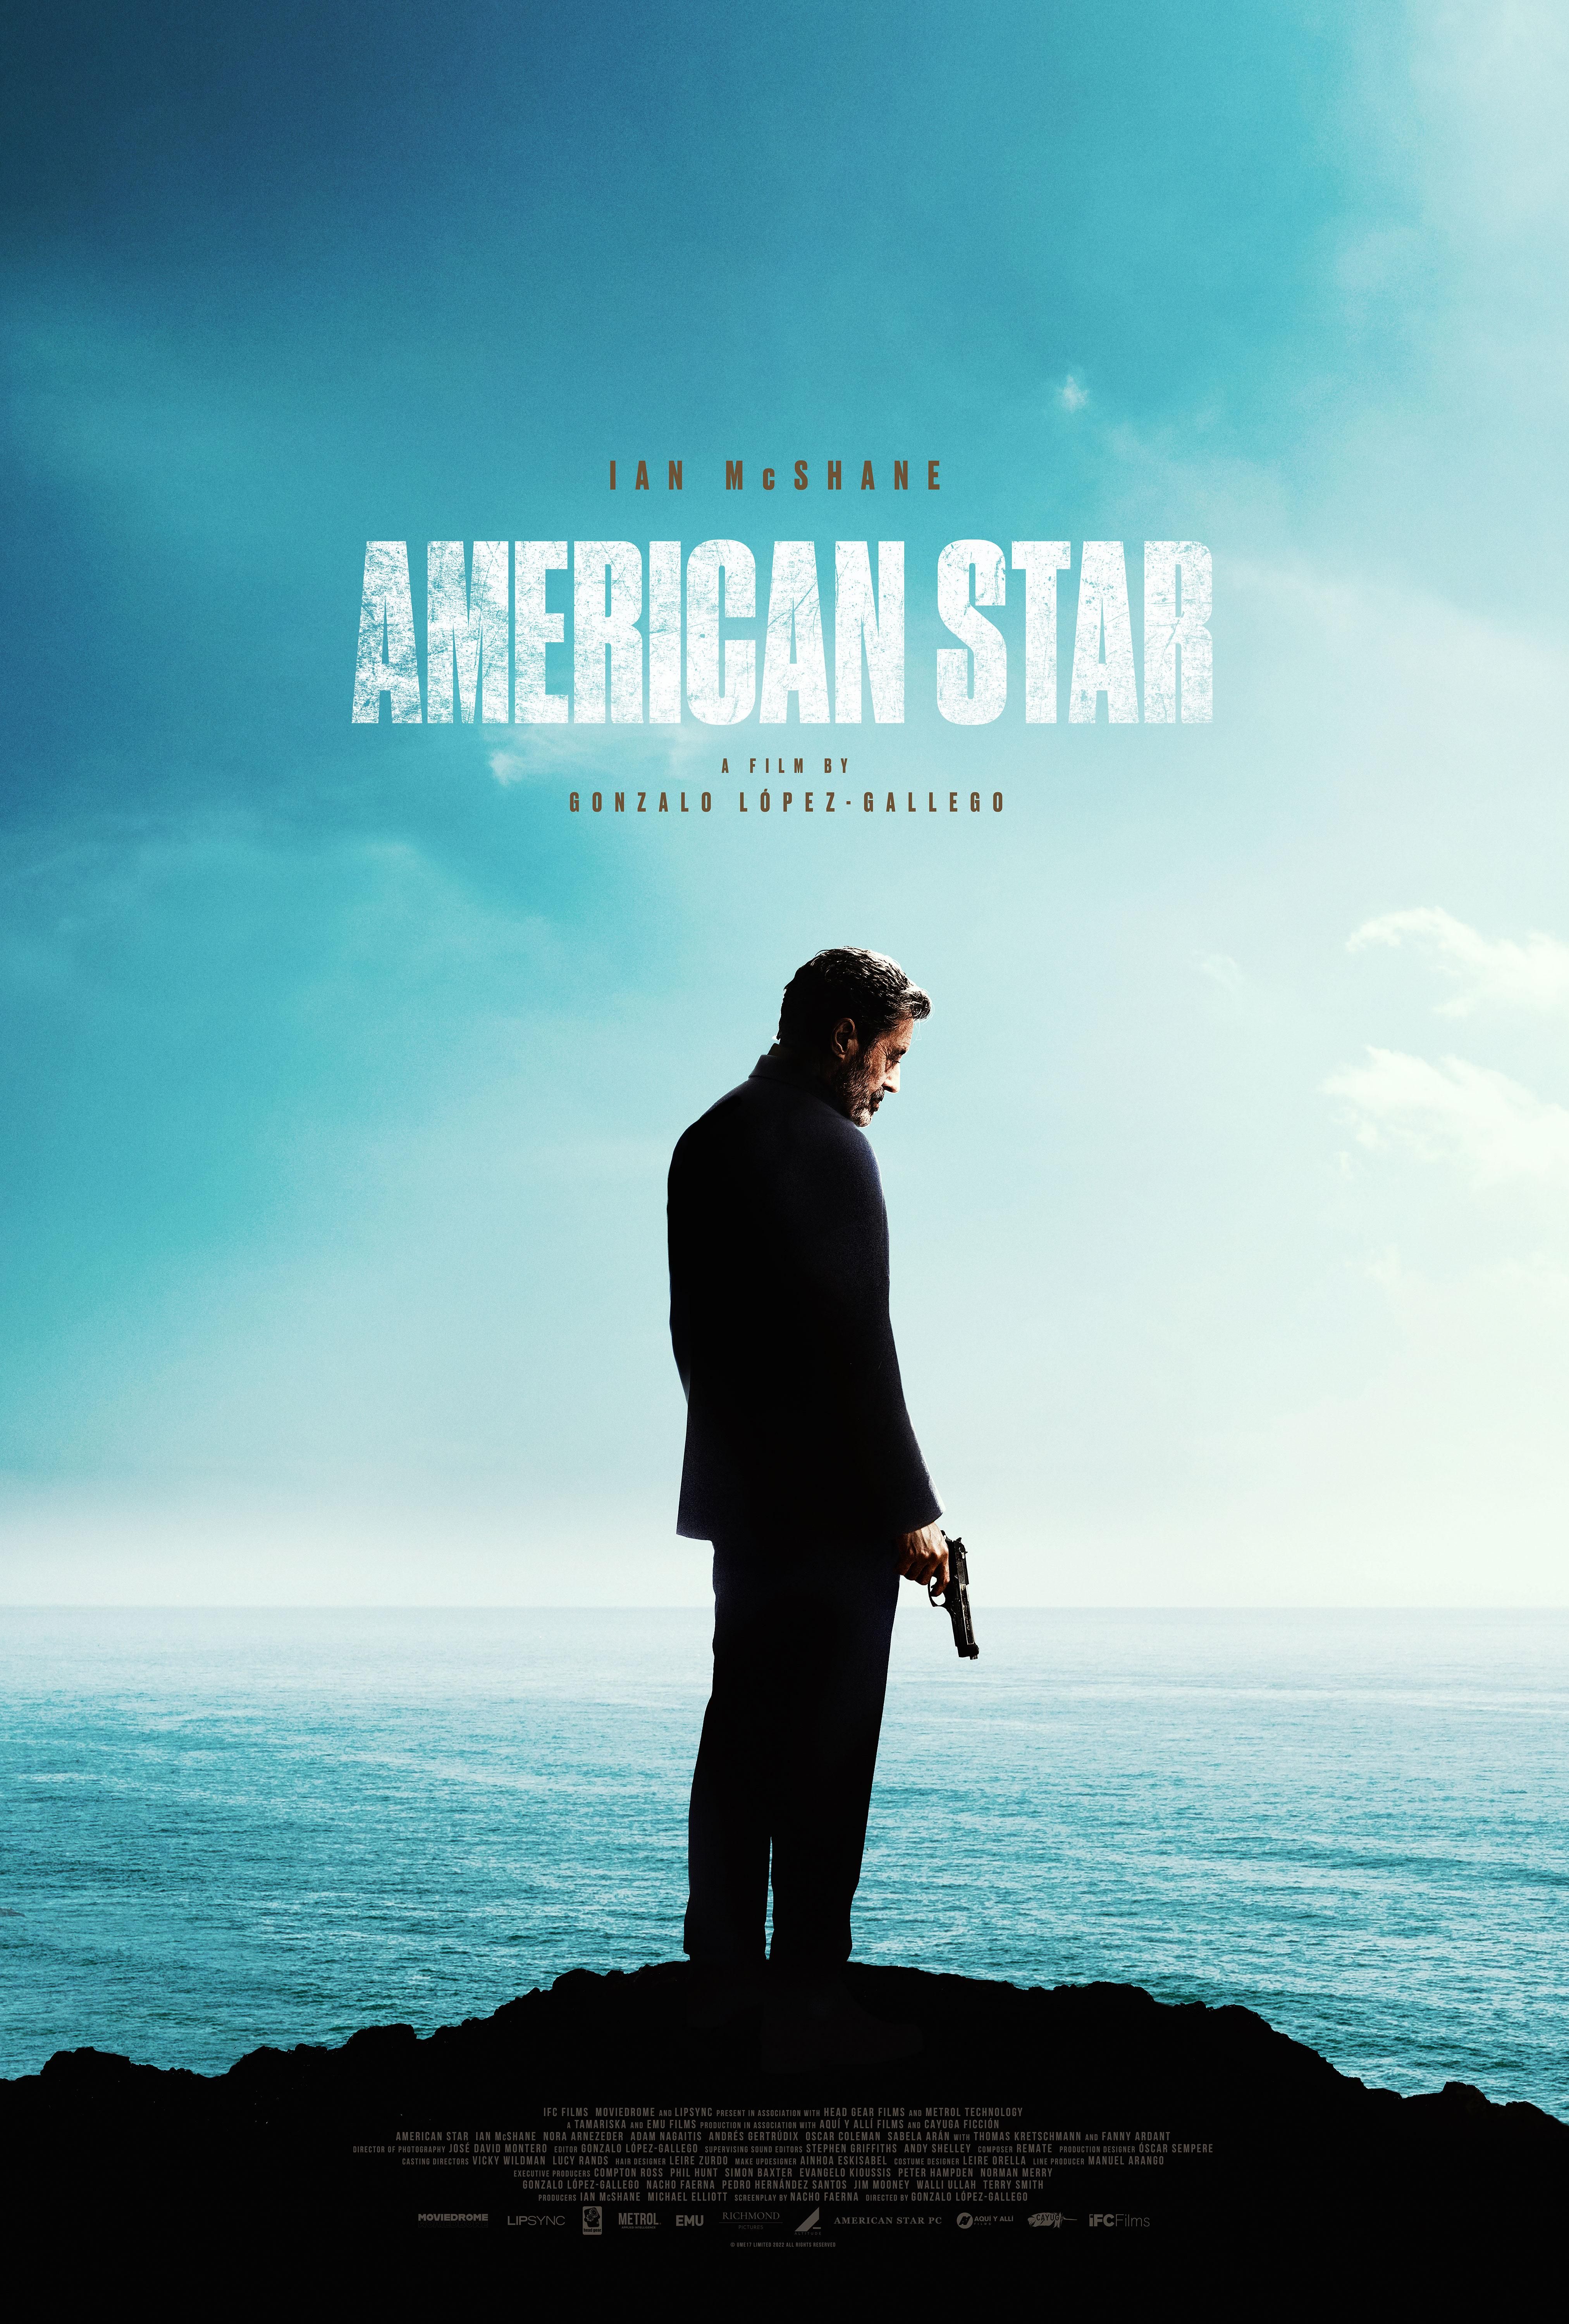 American Star Review: Ian McShane’s Exquisite Performance Is The Highlight Of A Moody Hitman Drama